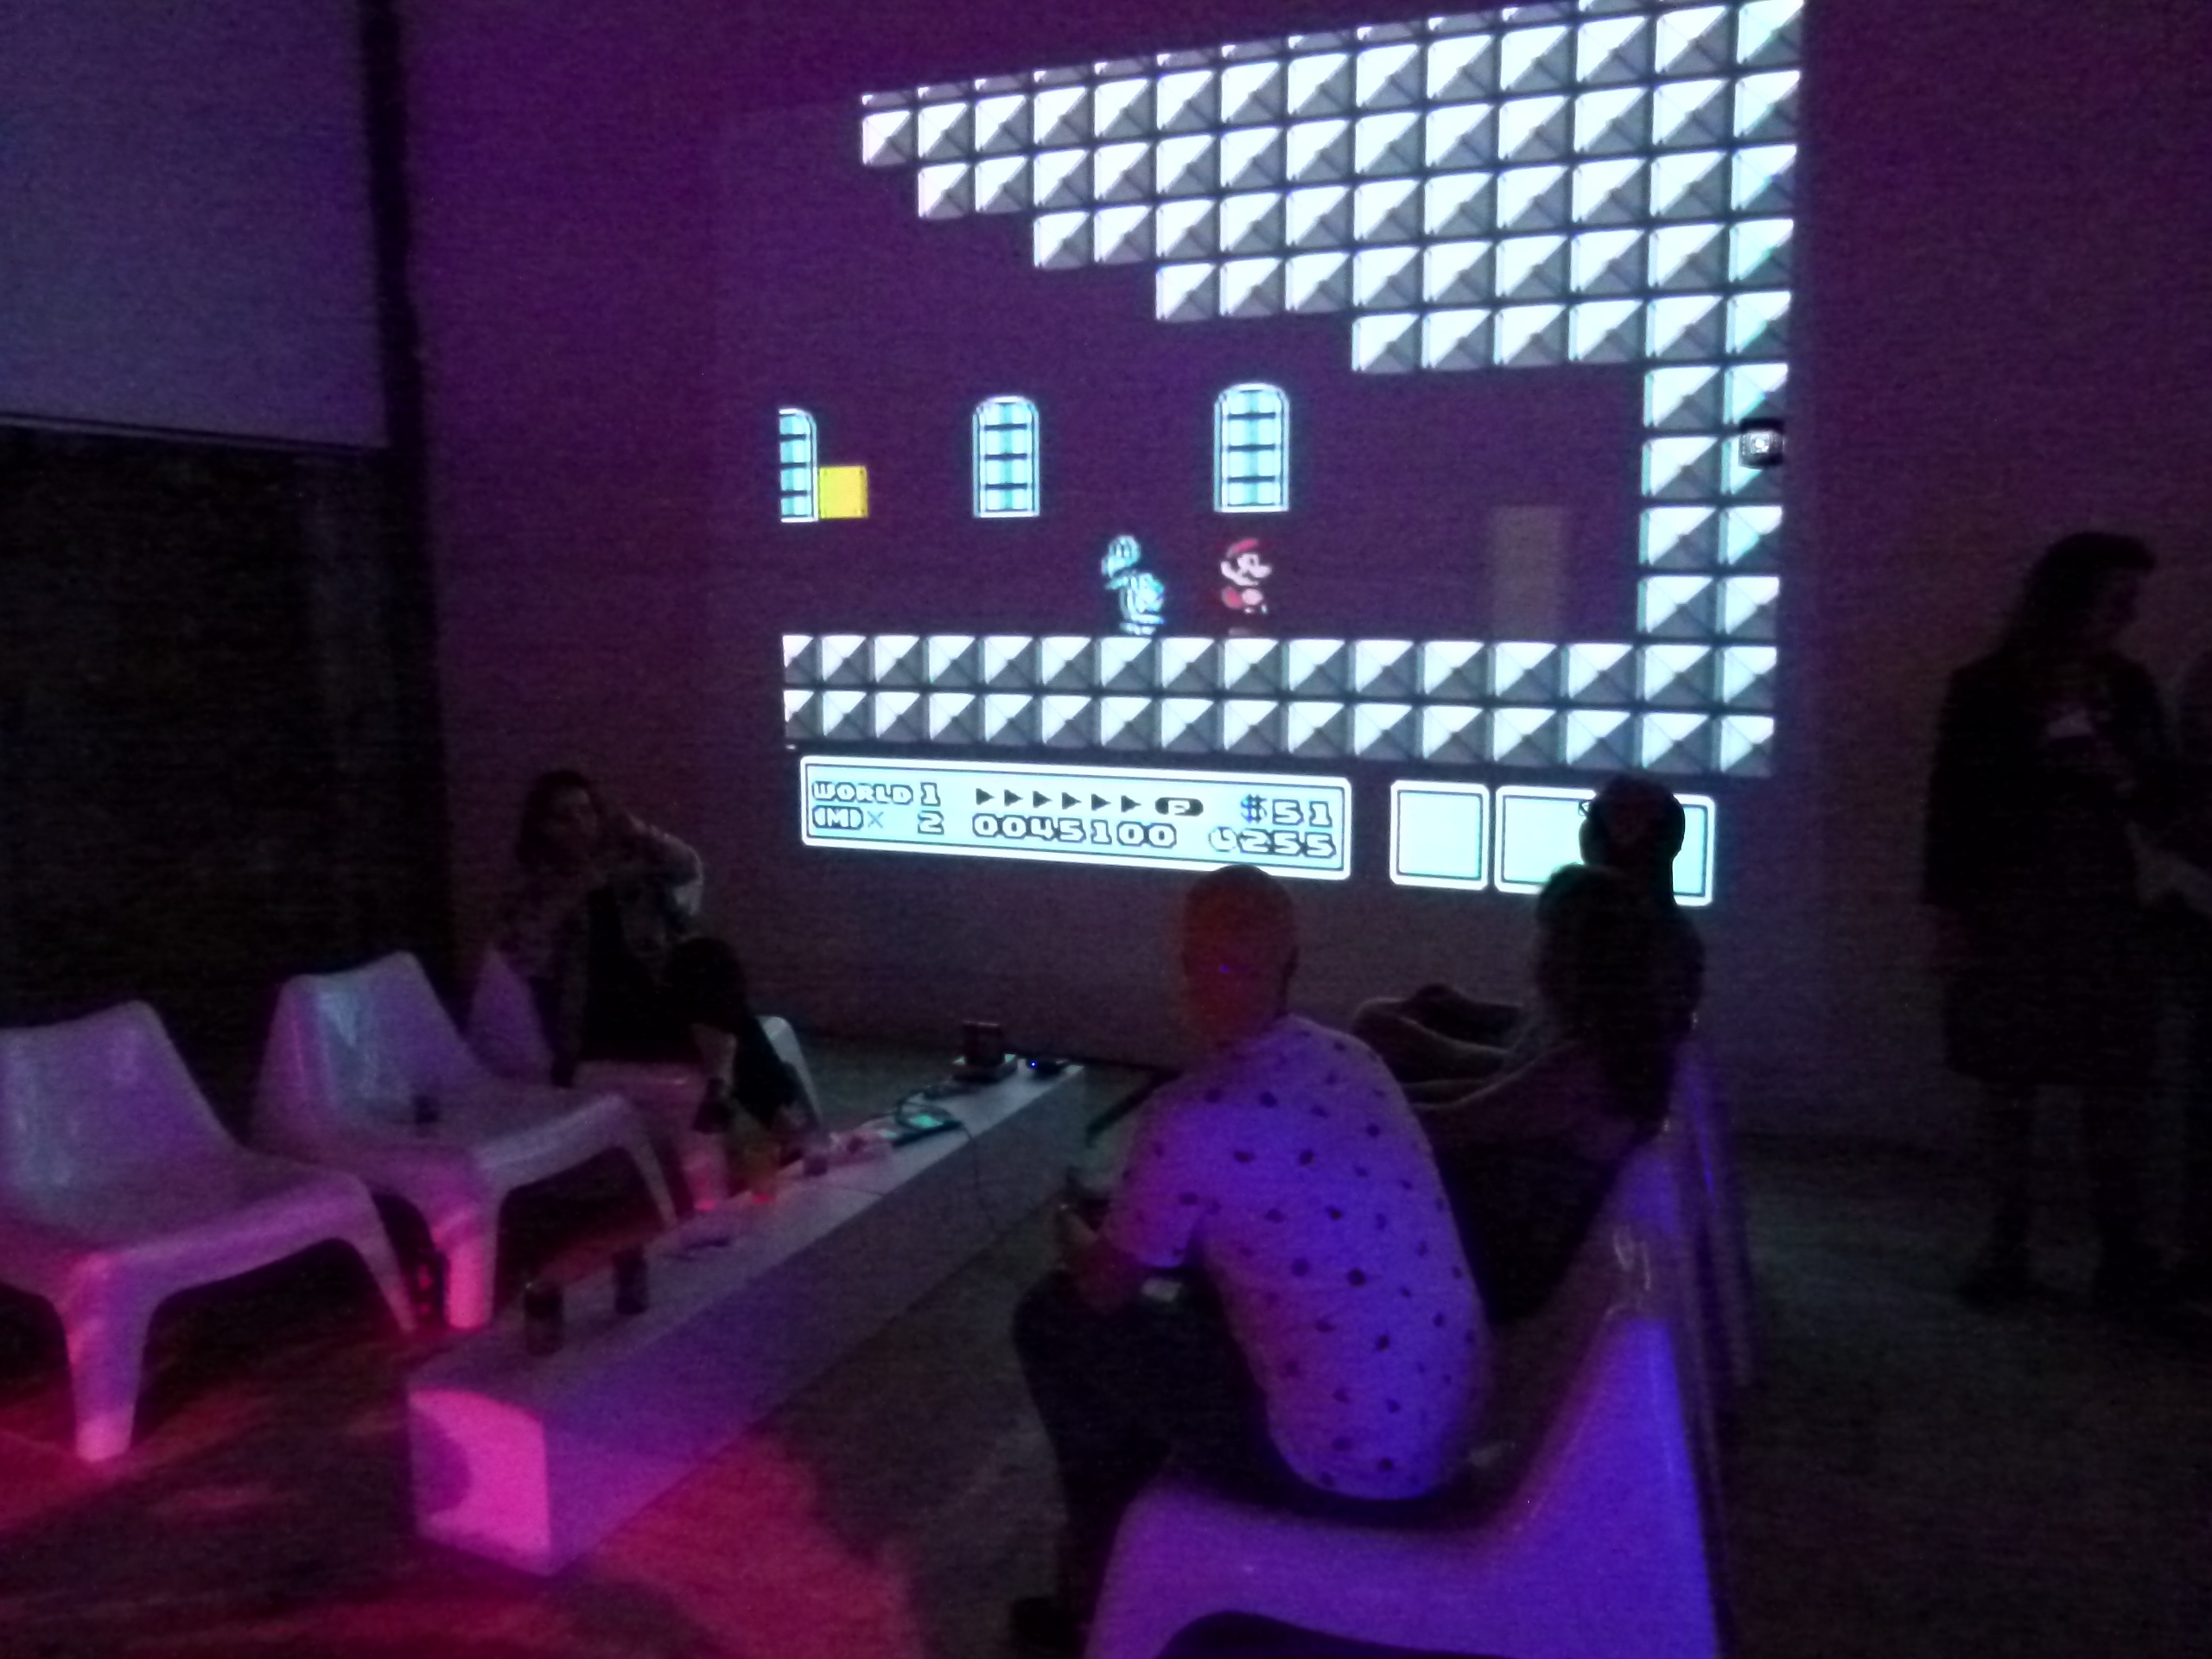 You could even play video games that were projected onto the wall.